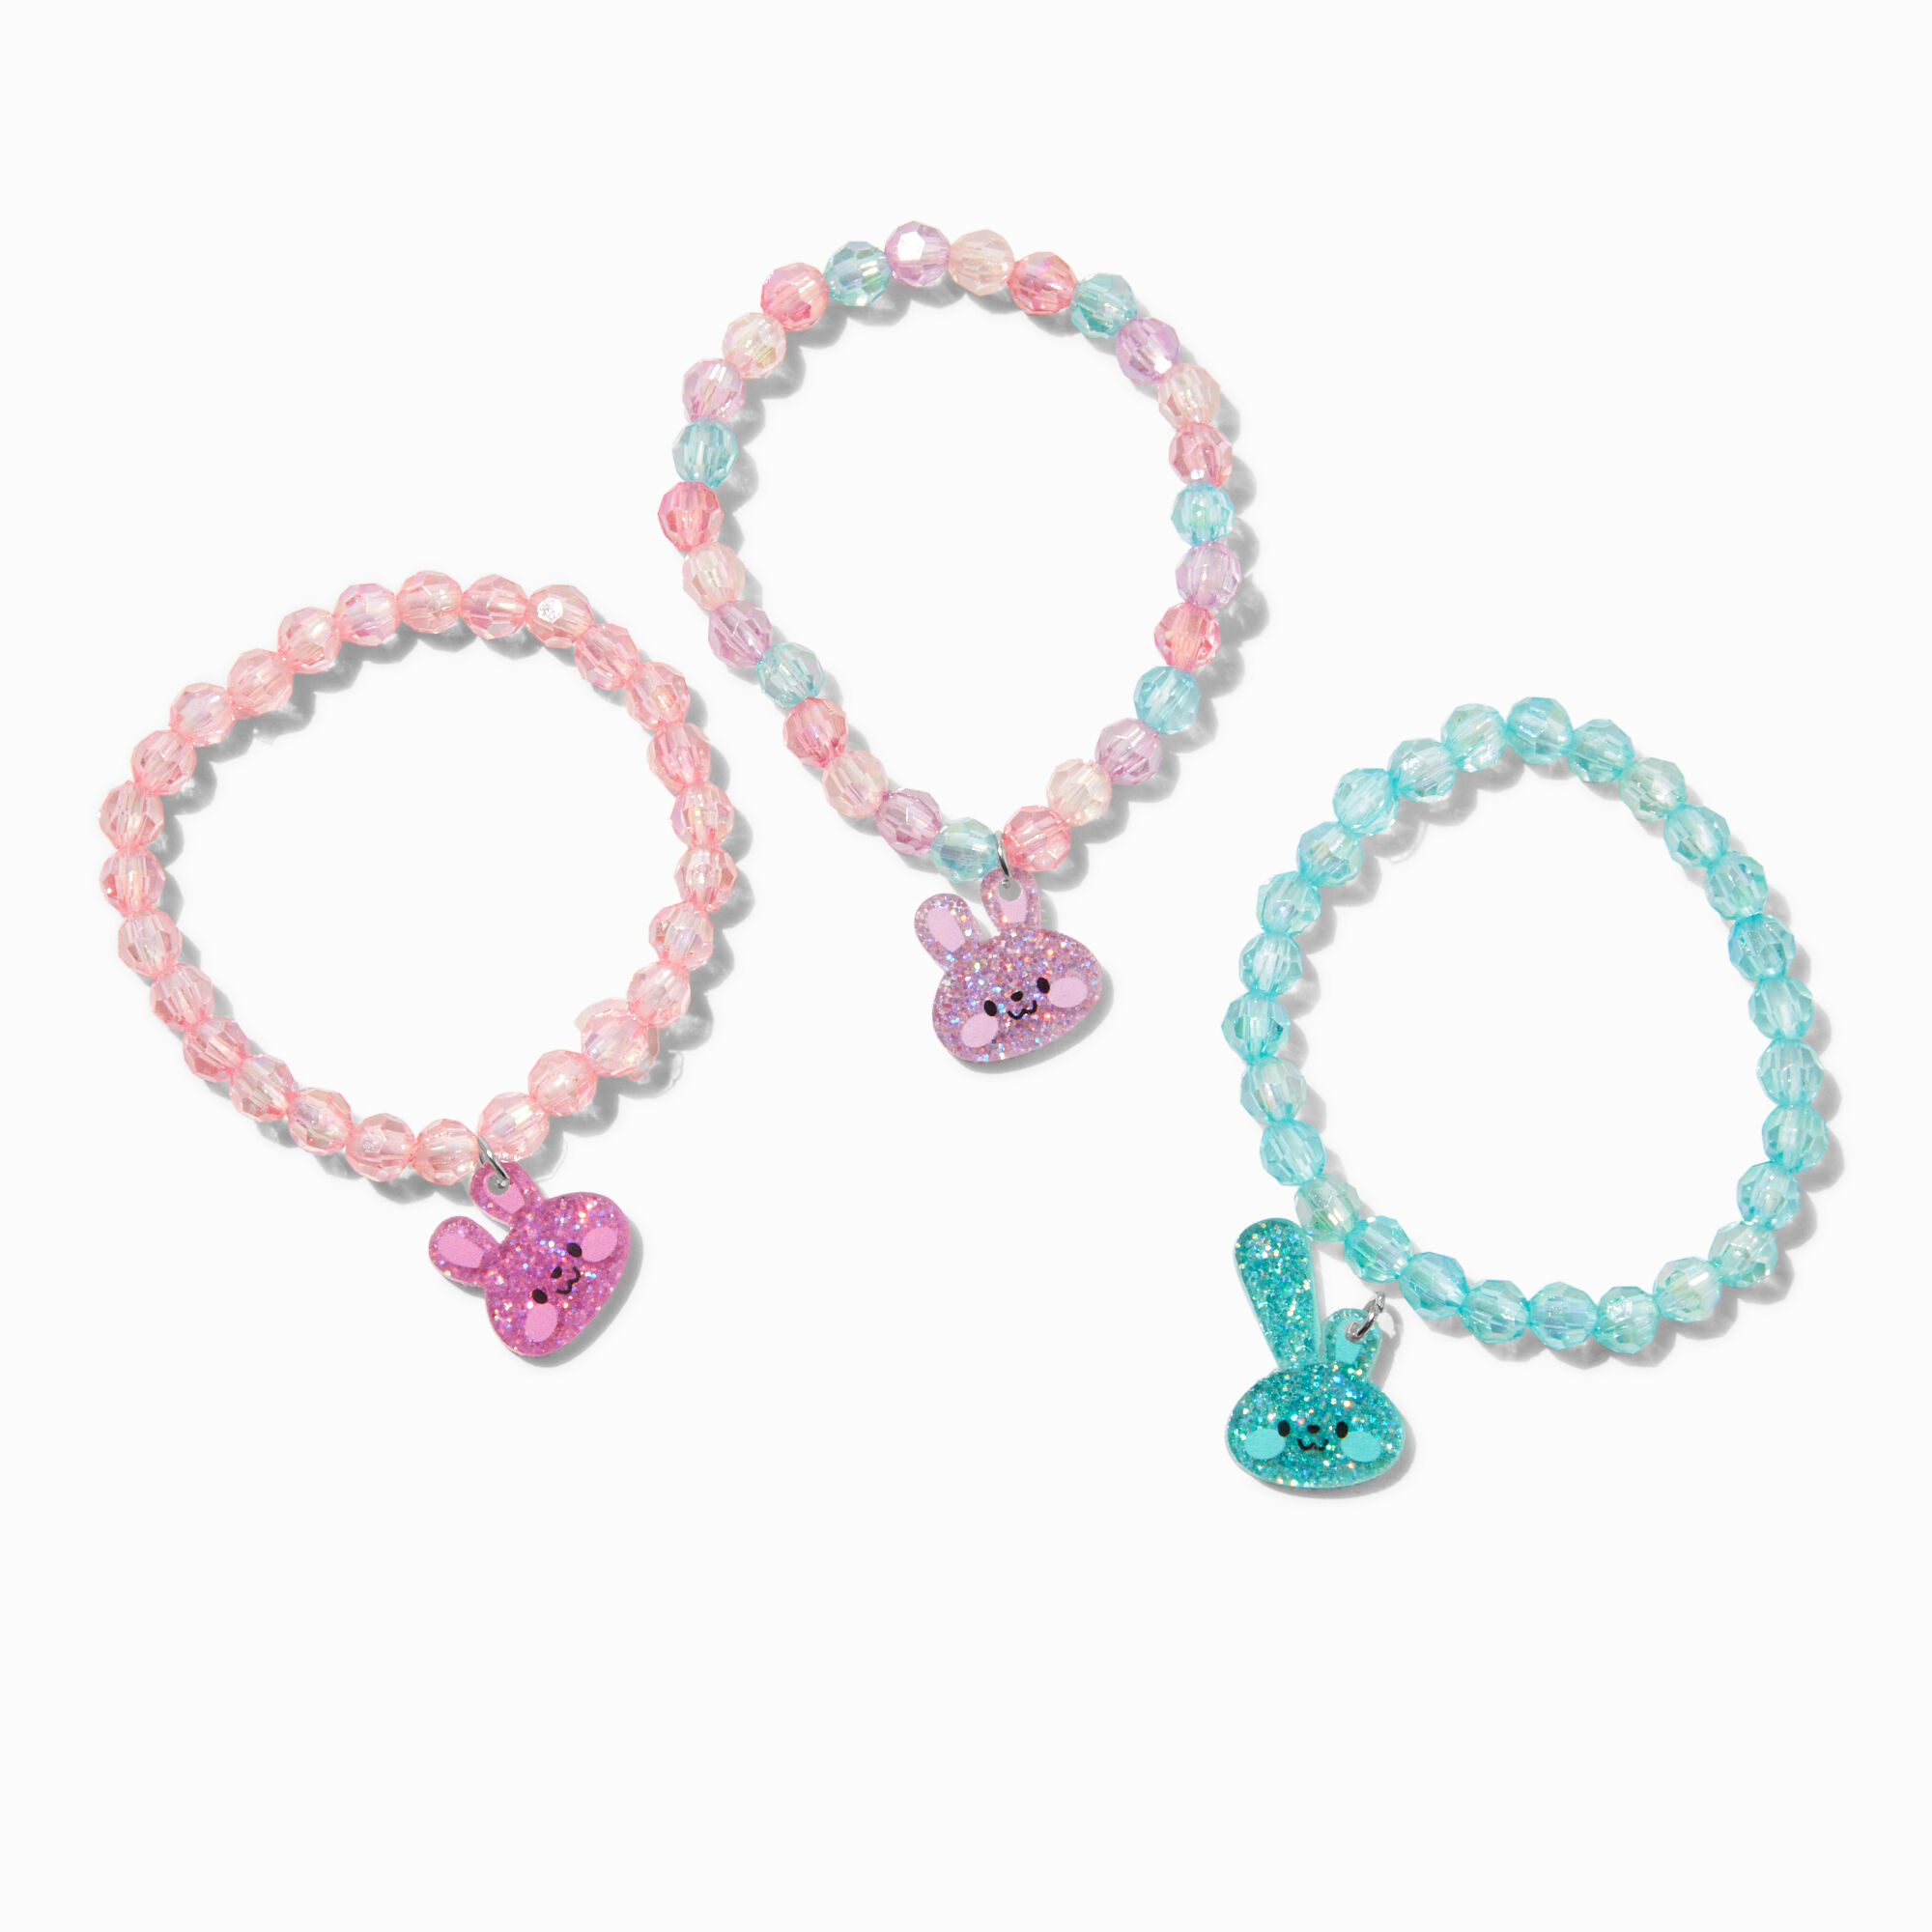 View Claires Club Bunny Beaded Stretch Bracelets 3 Pack information